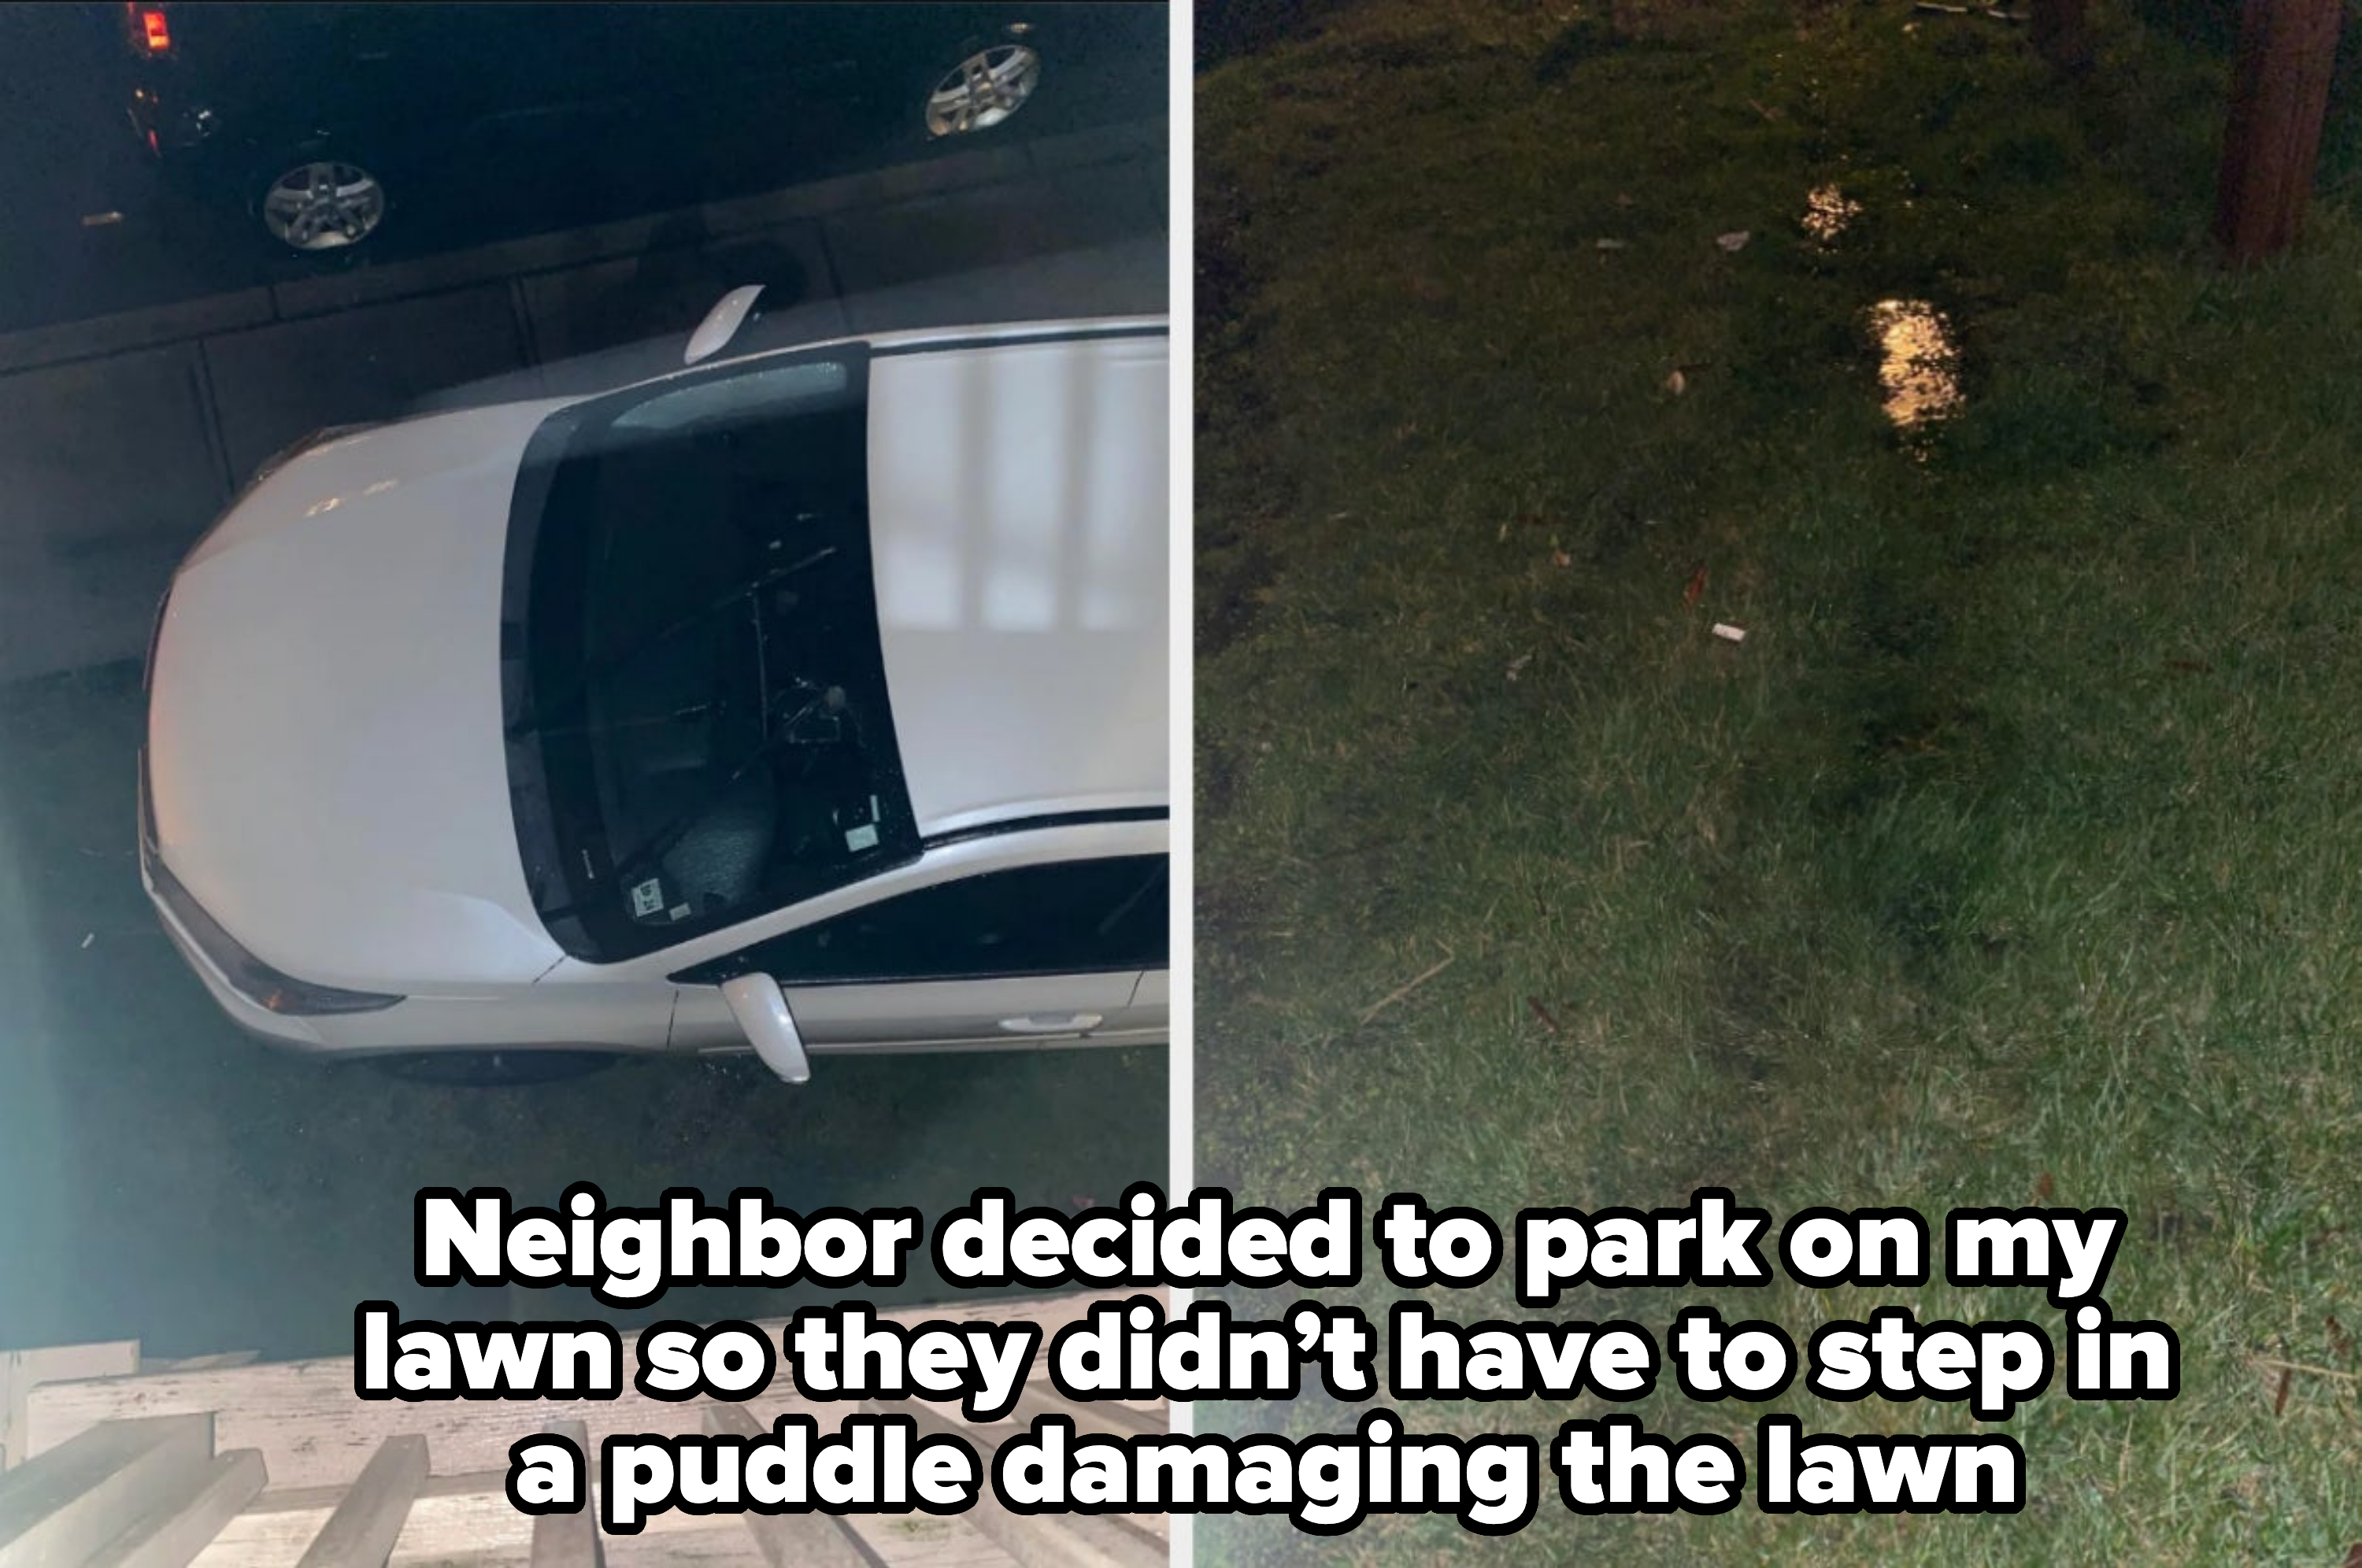 On the left, an overhead view of a white car parked on a residential street. On the right, a patch of grass at night with a small area of standing water